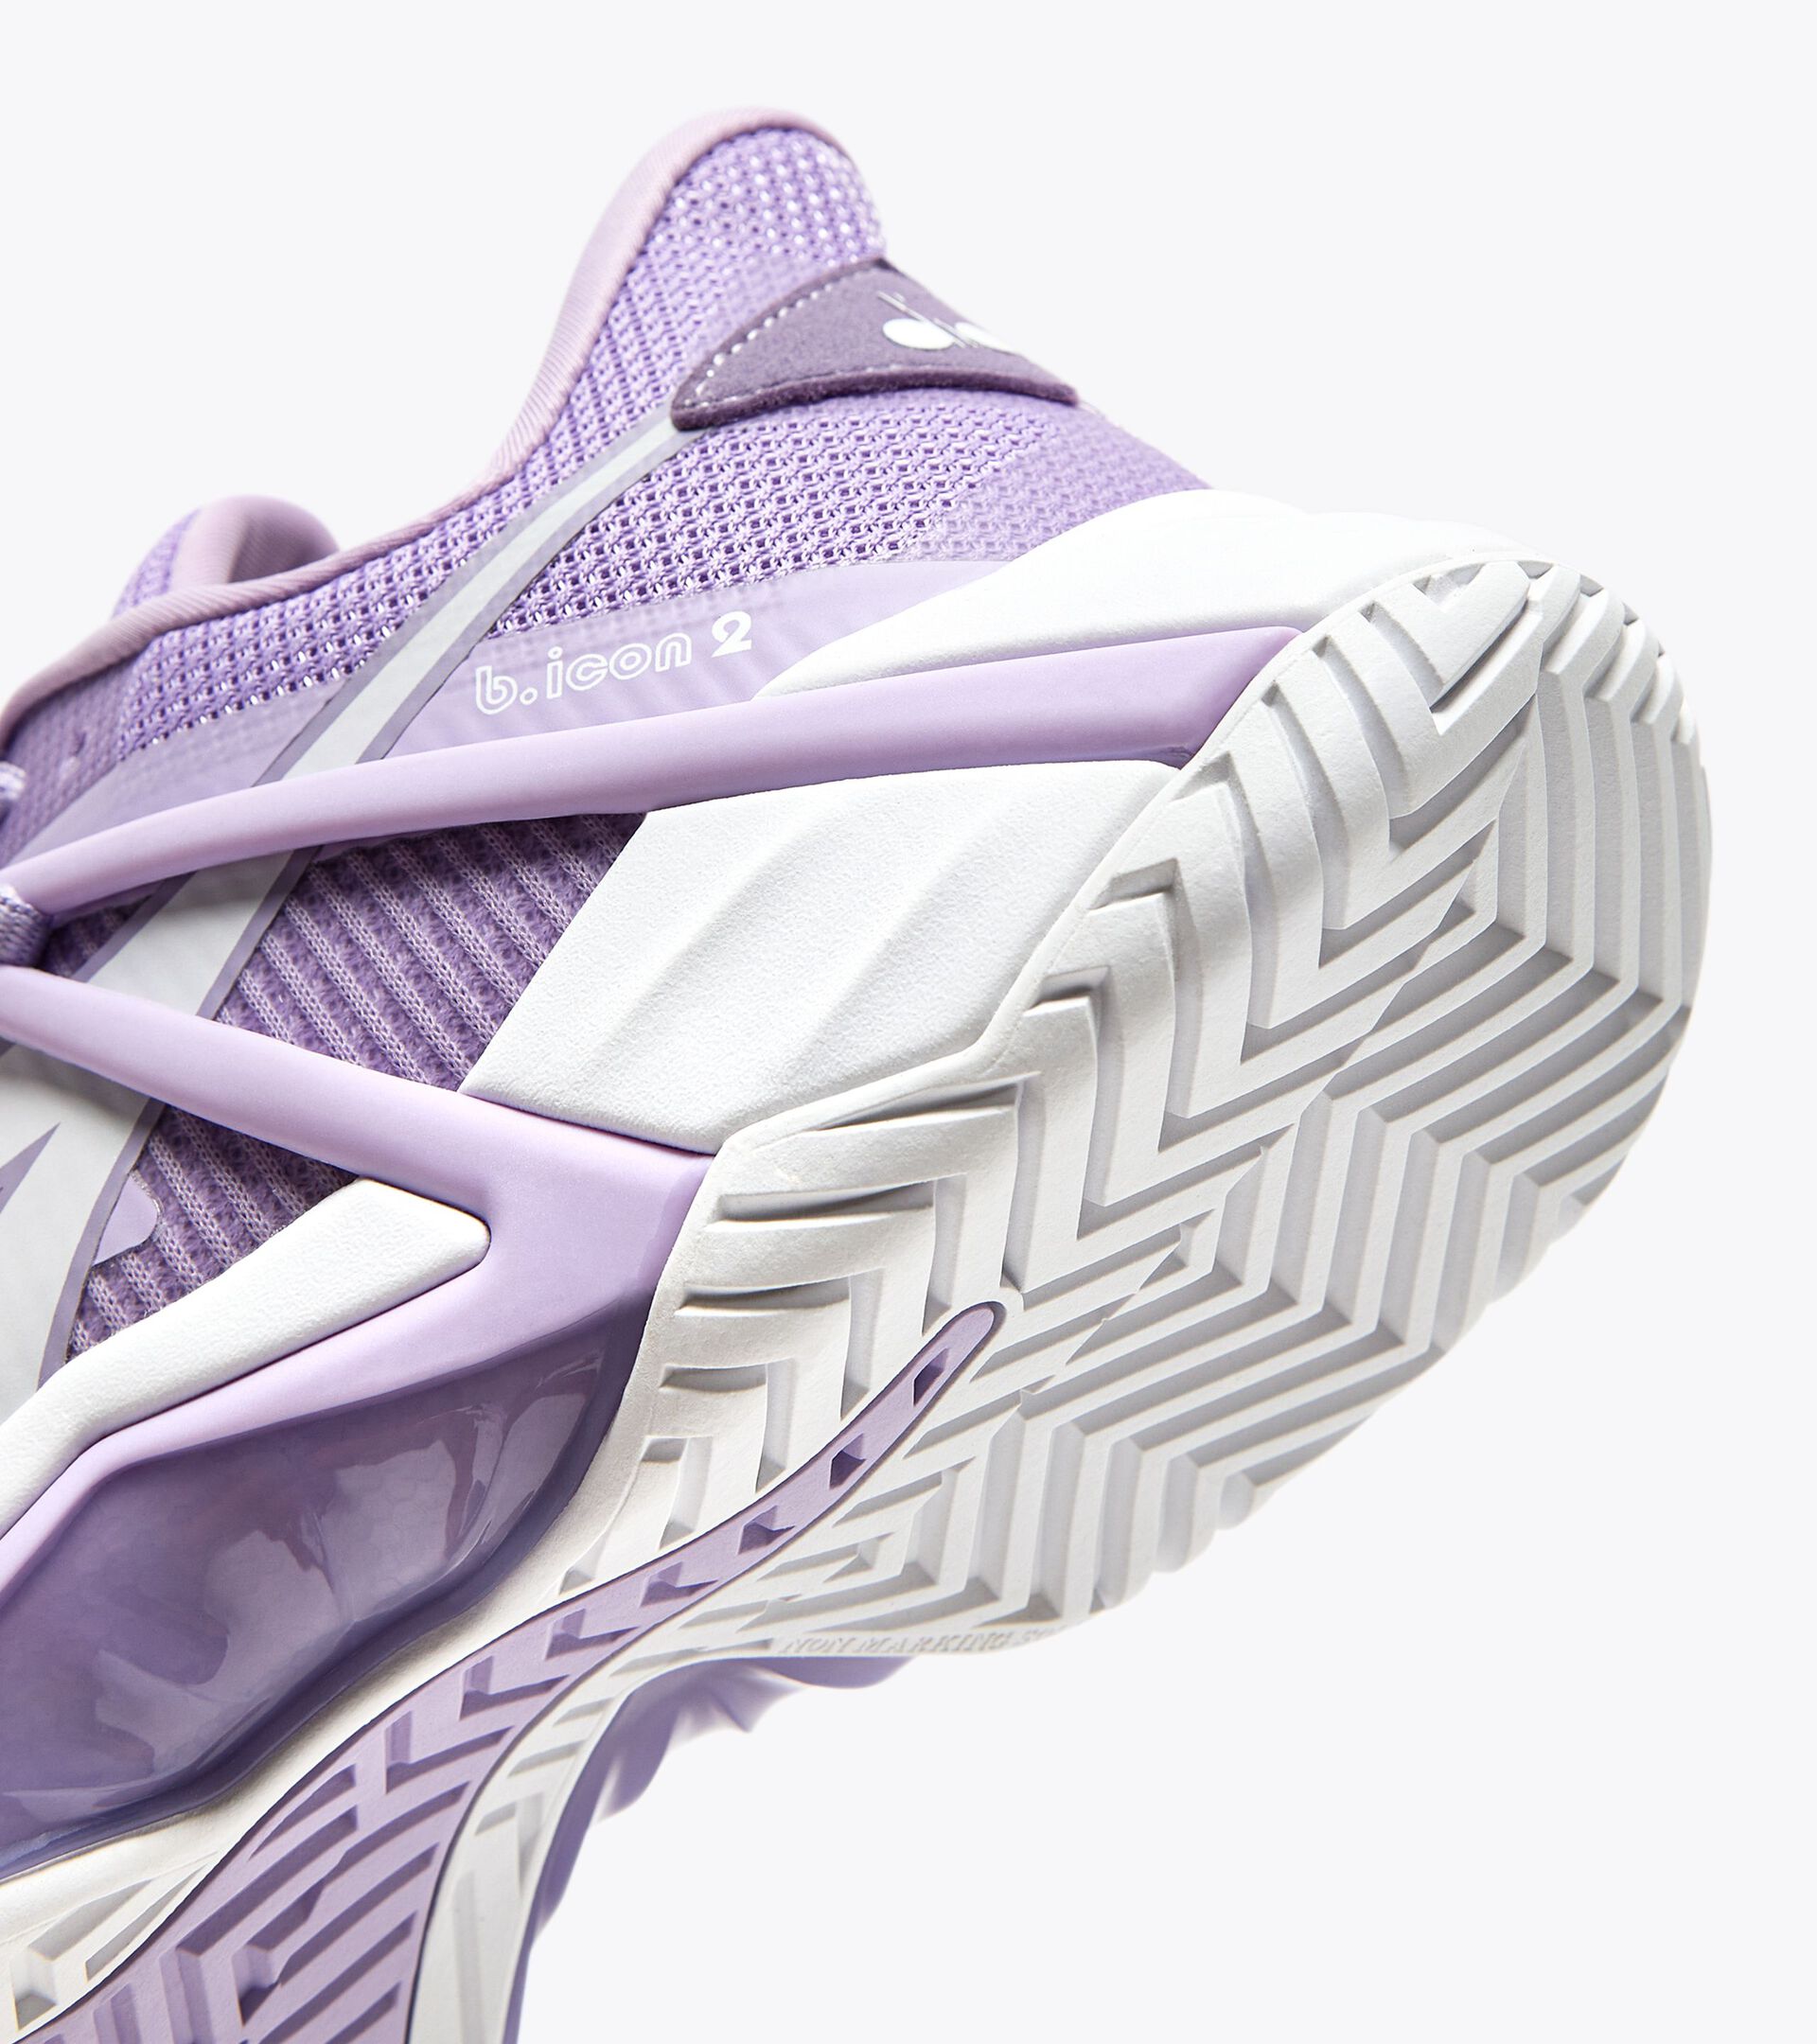 Tennis shoes for hard surfaces or clay courts - Women B.ICON 2 W AG ORCHID BLOOM/WHITE - Diadora